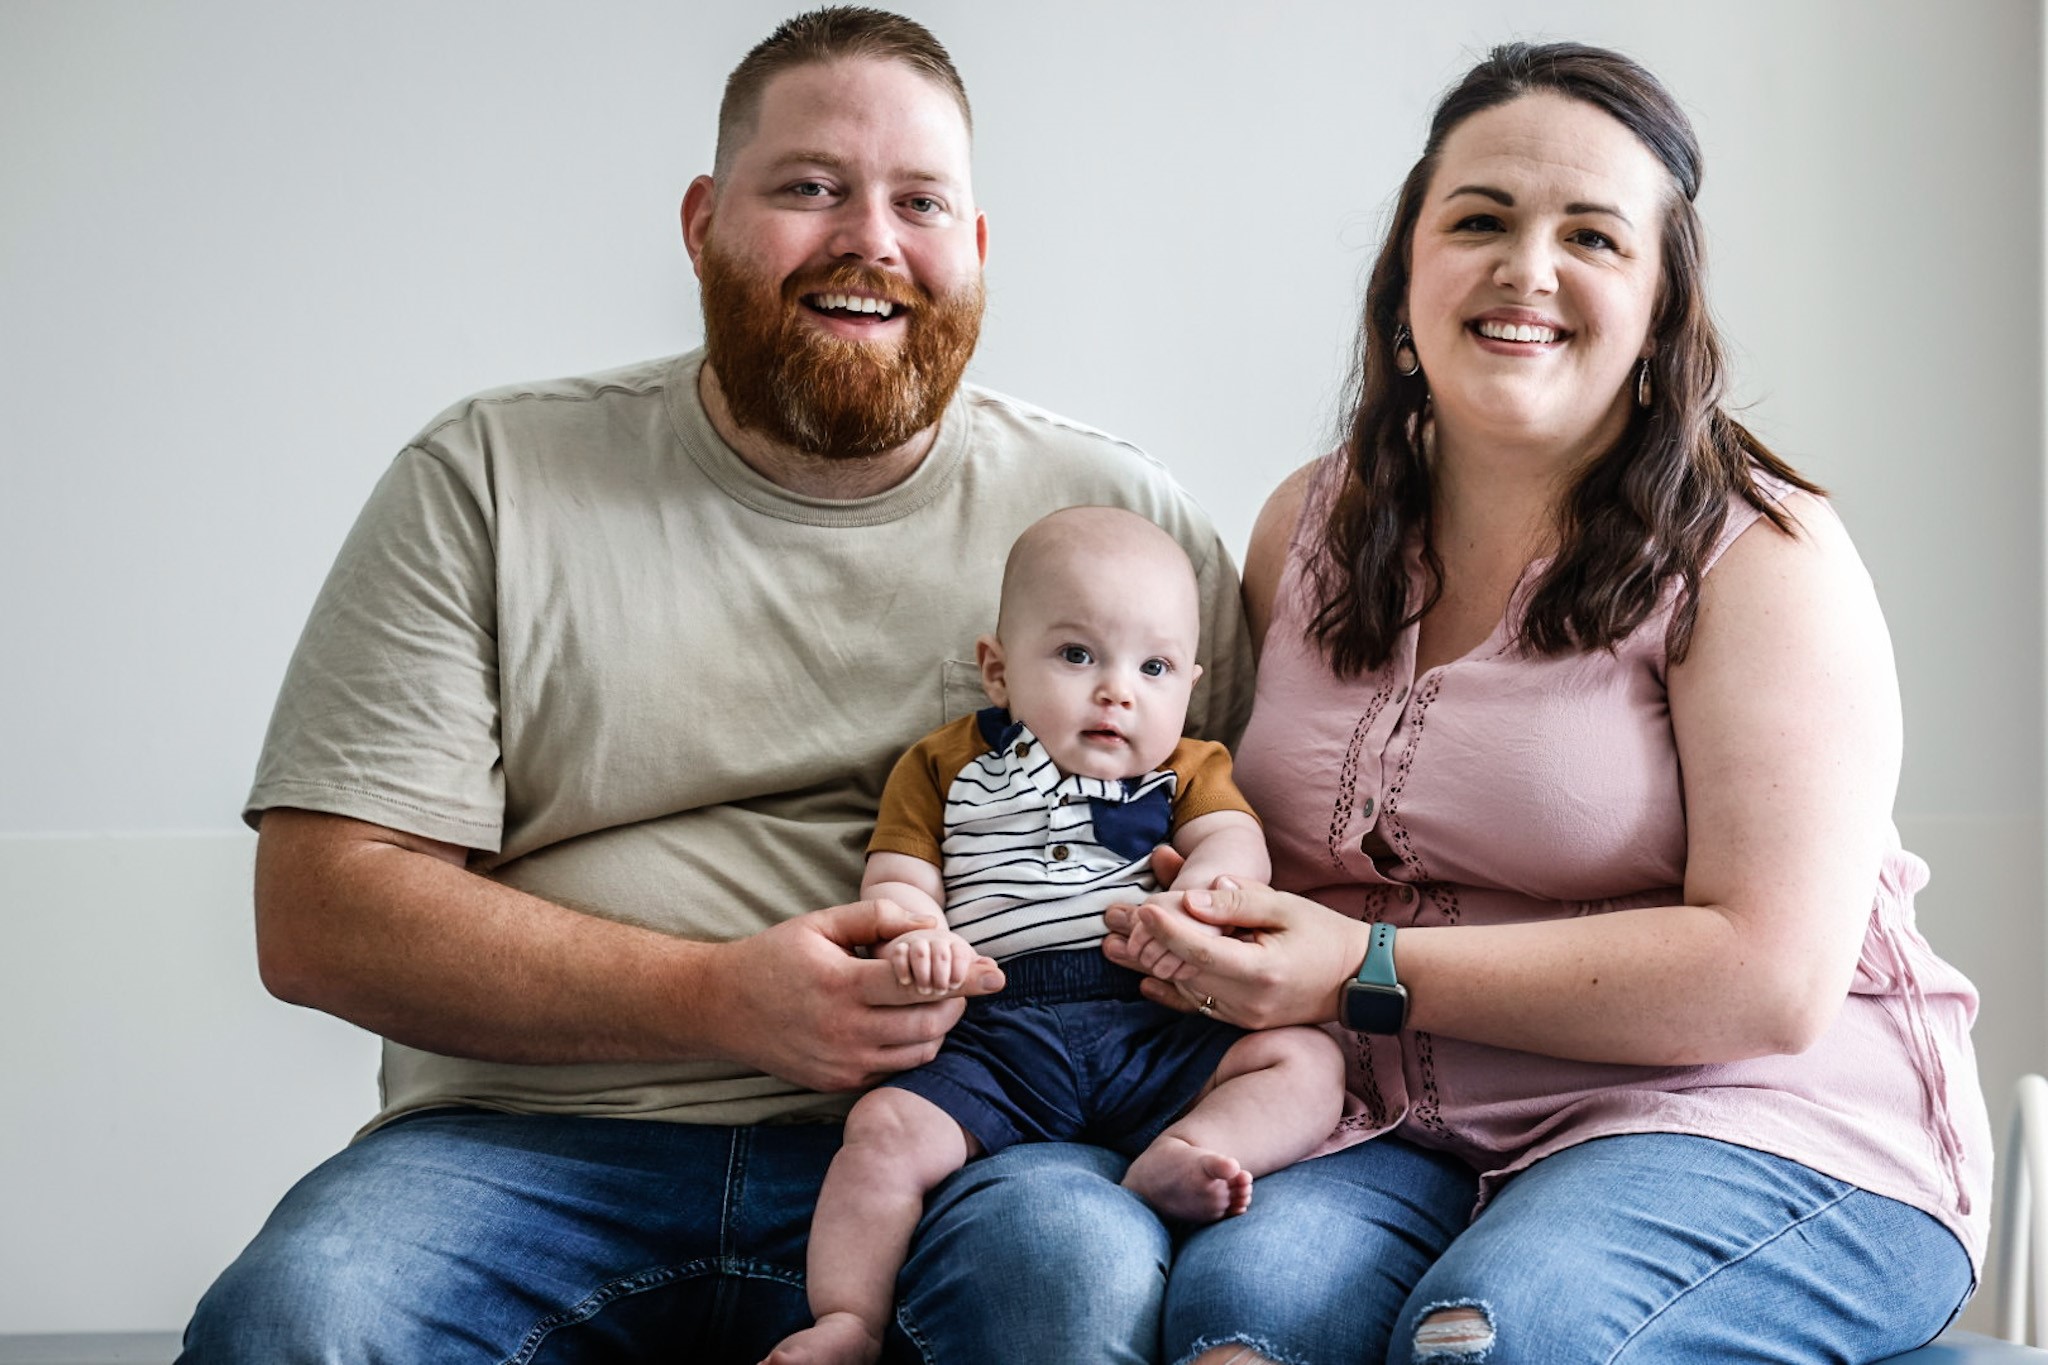 Cleft lip and palate Shriners surgery helps many, including Lauf family of Springboro